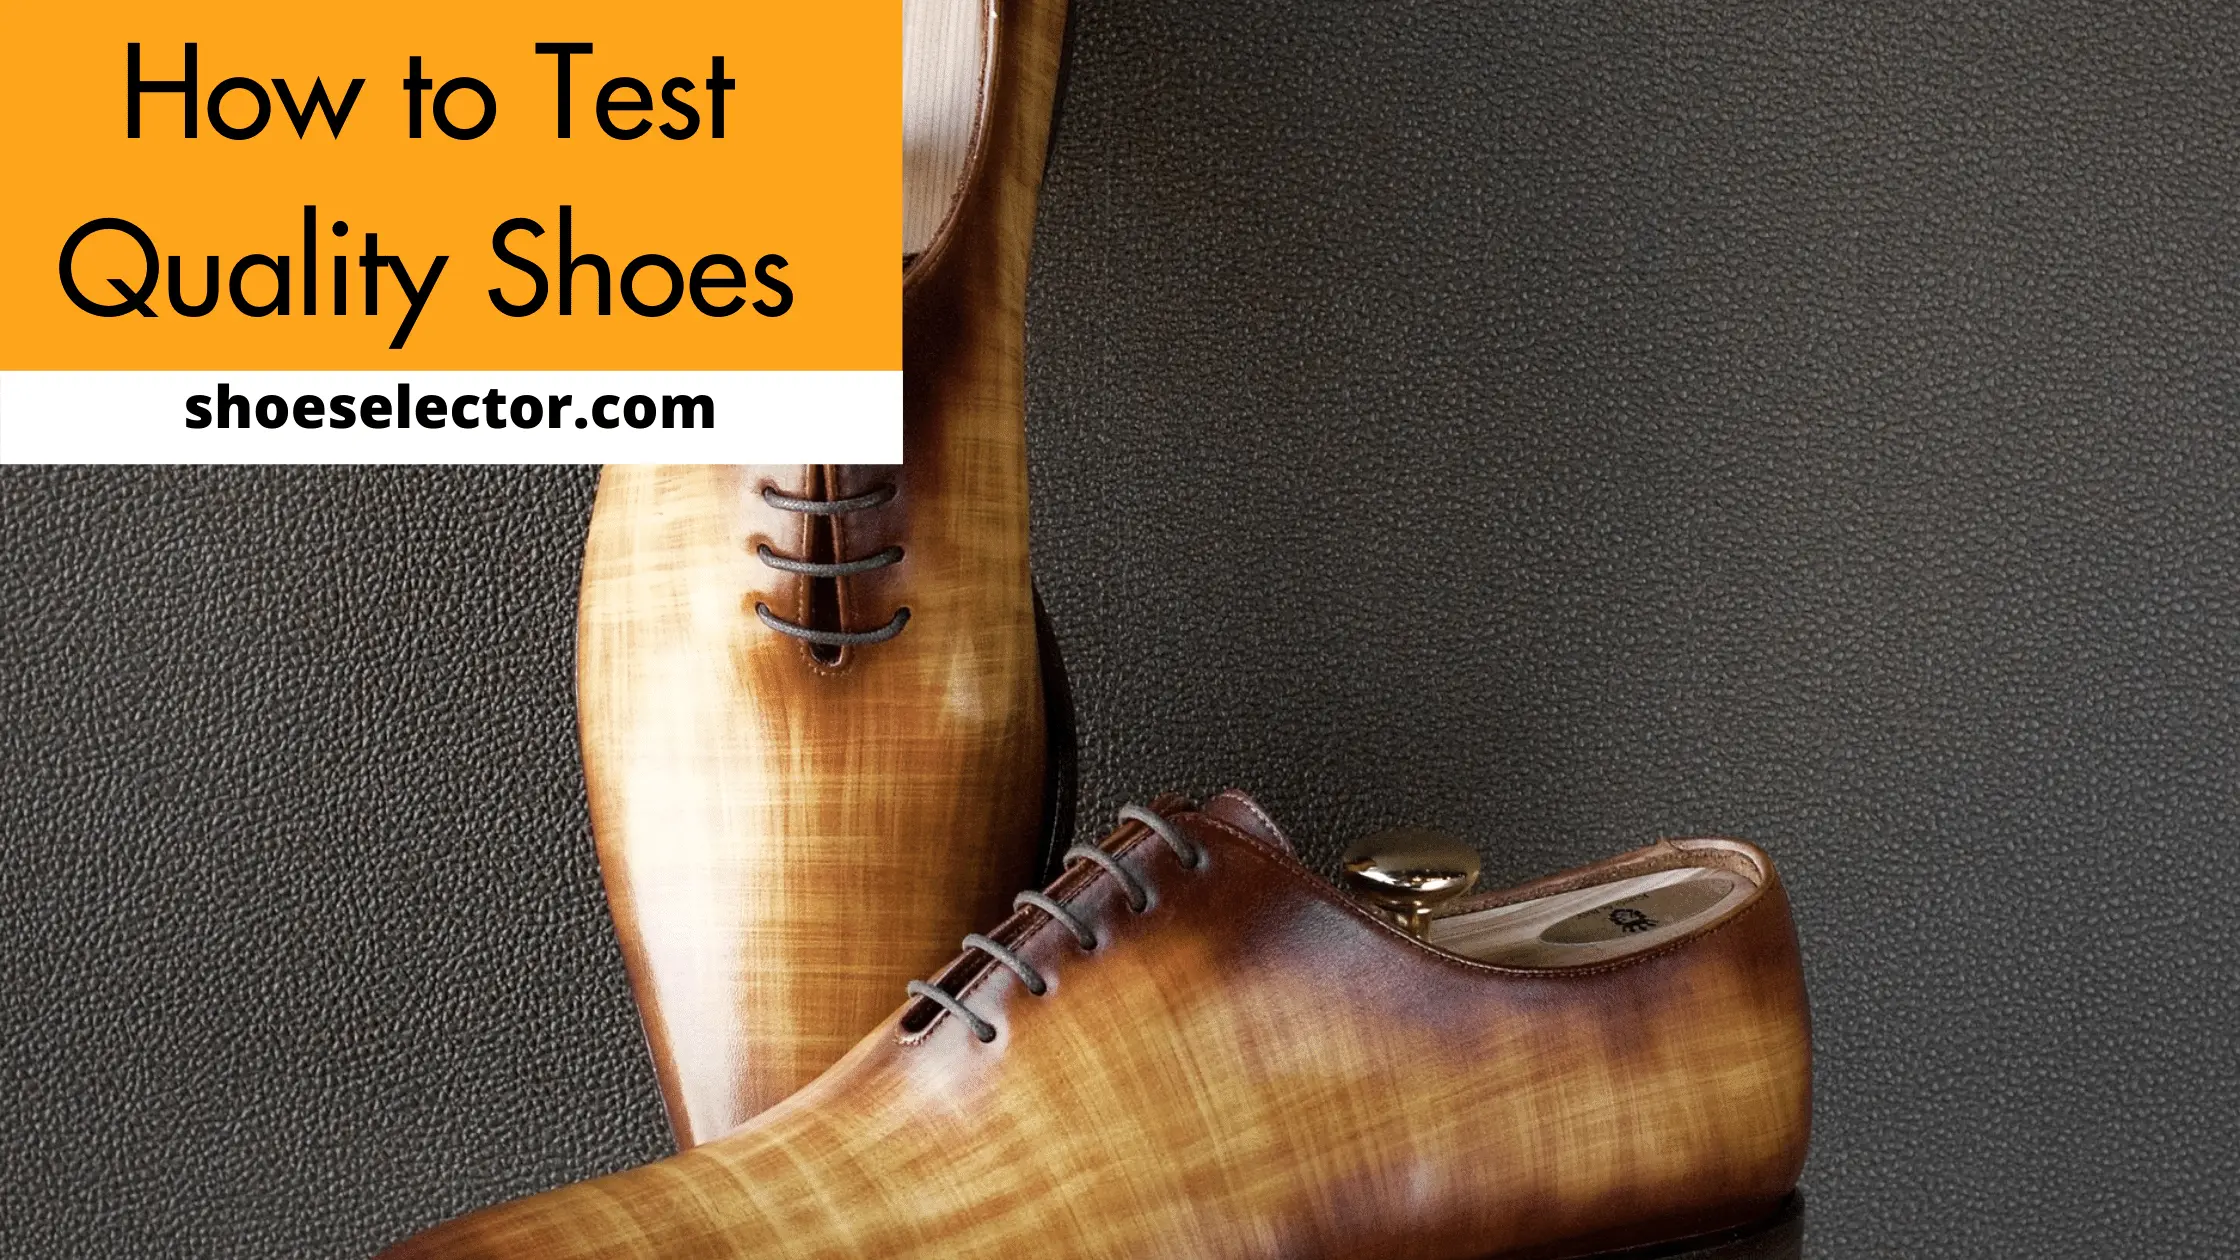 How to Test Quality Shoes? Latest Guide